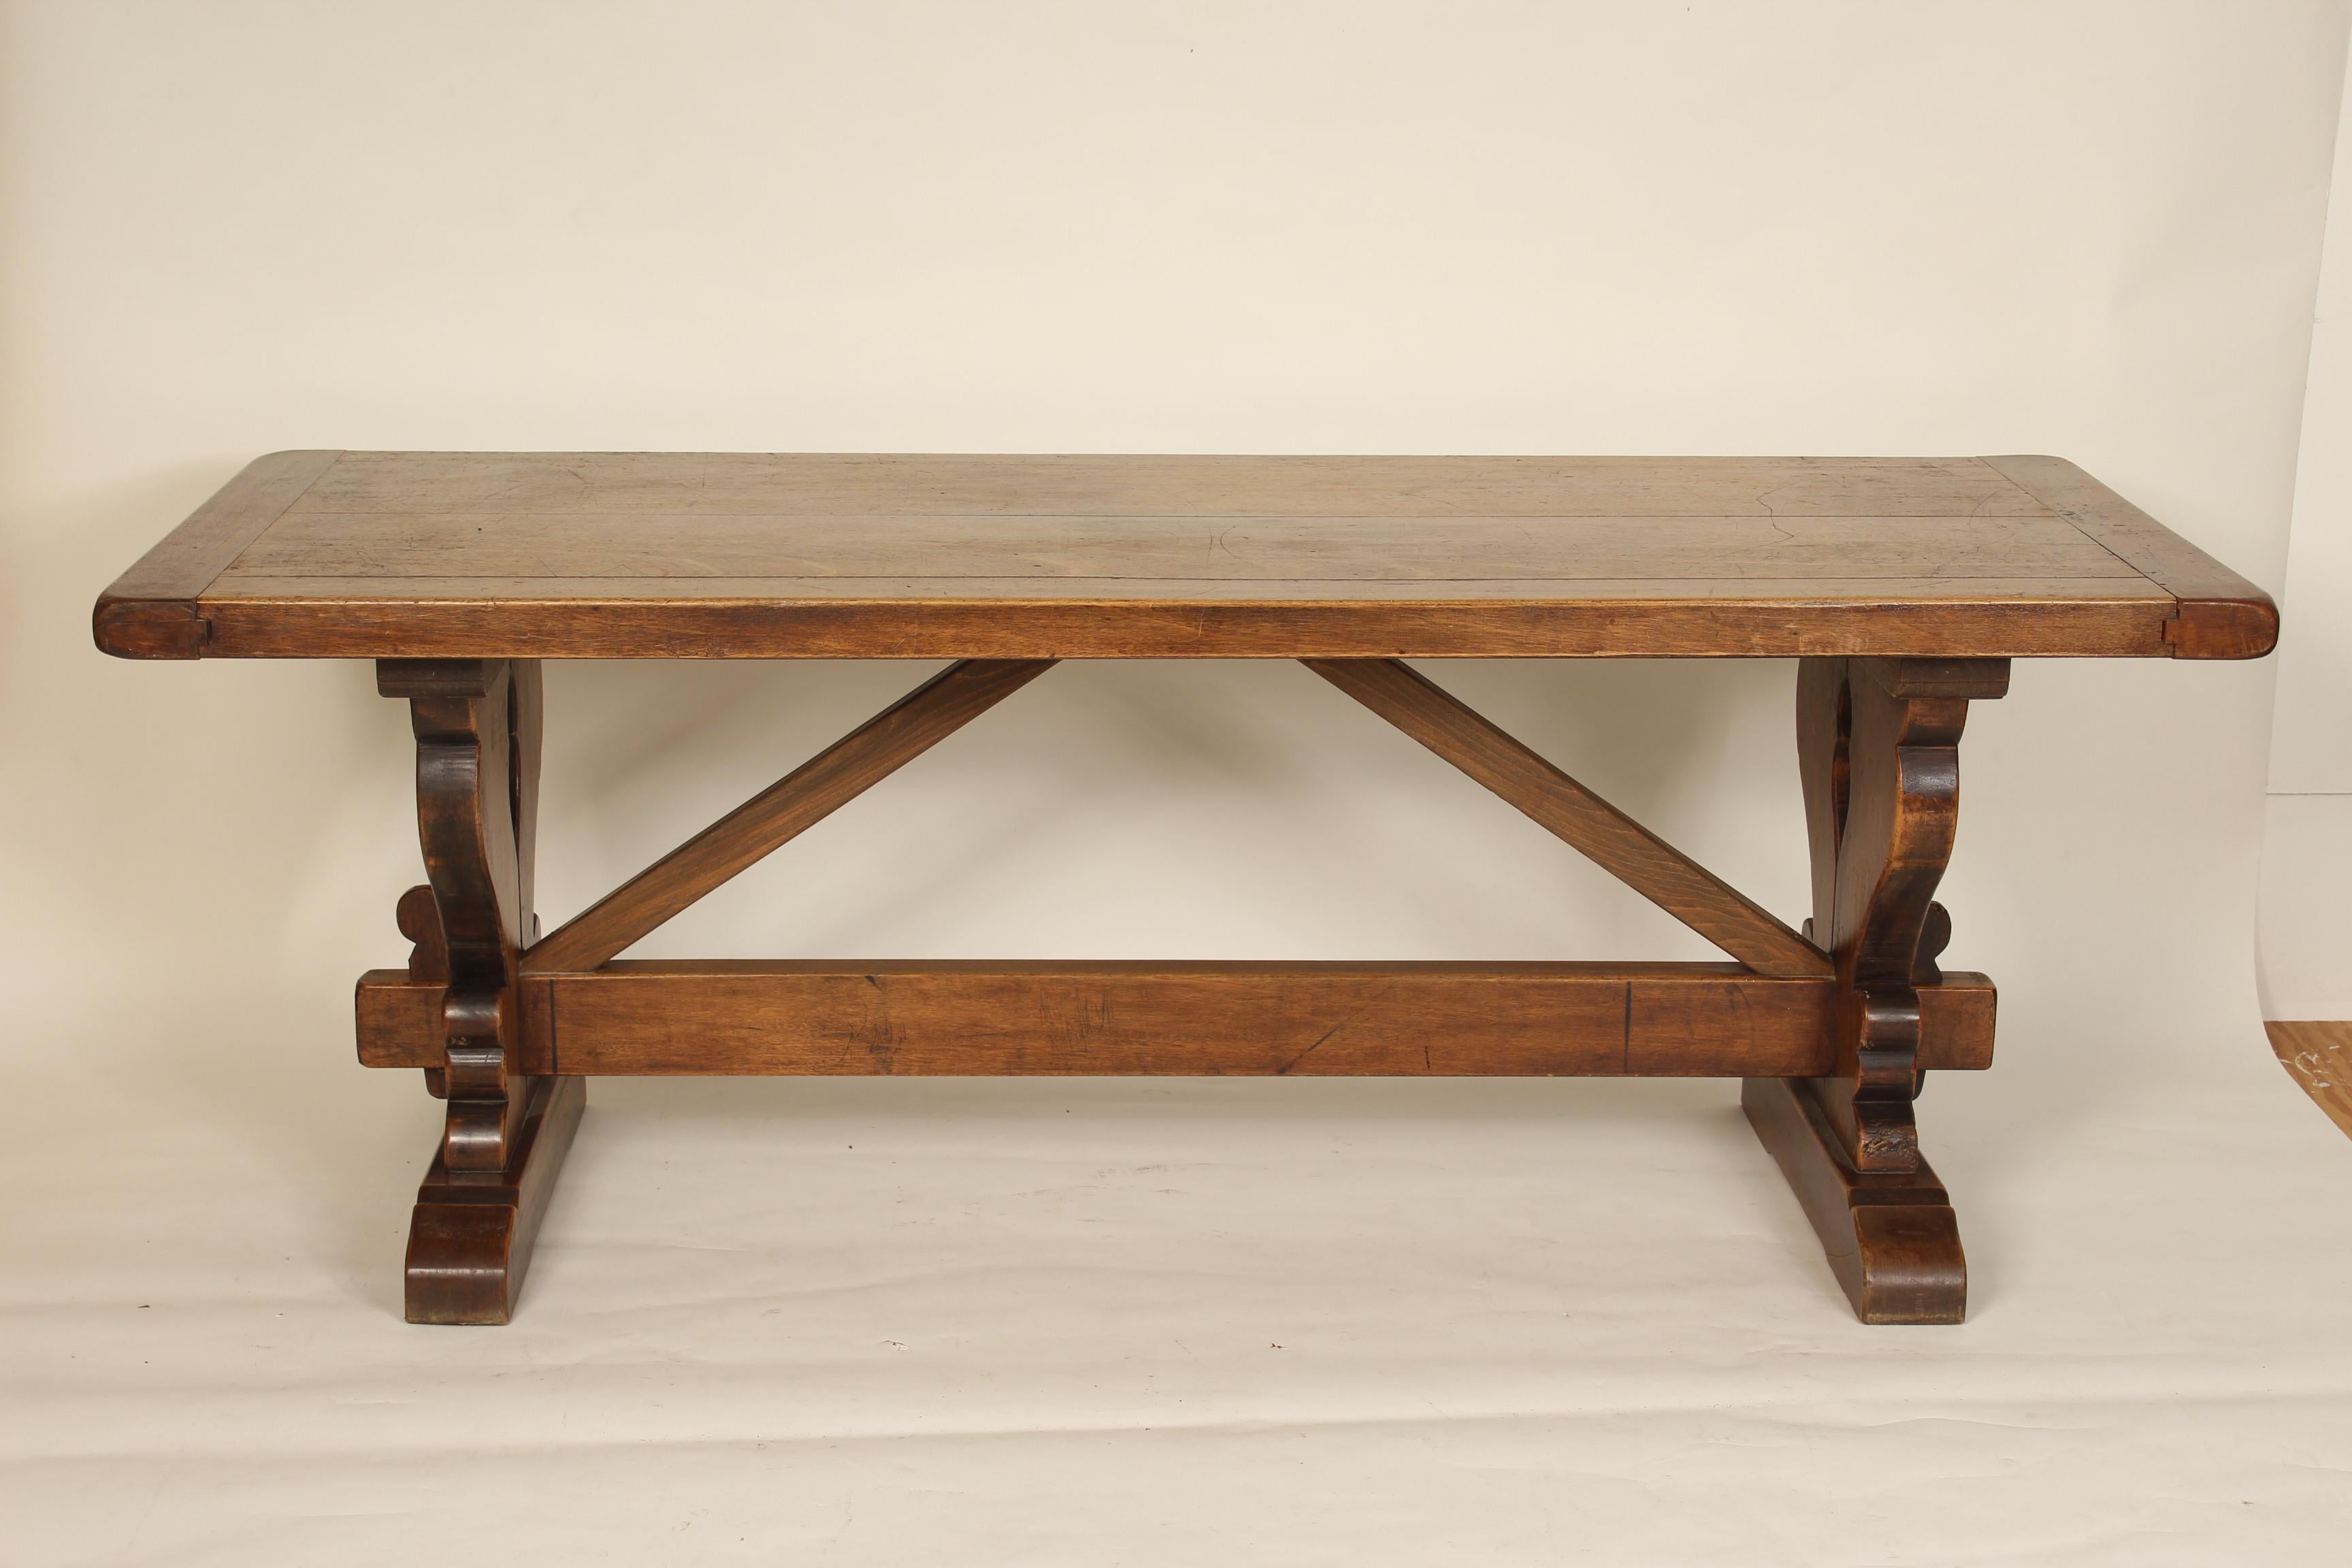 Baroque style walnut plank top dining room table, mid-20th century. The top has nice color and is 2.25